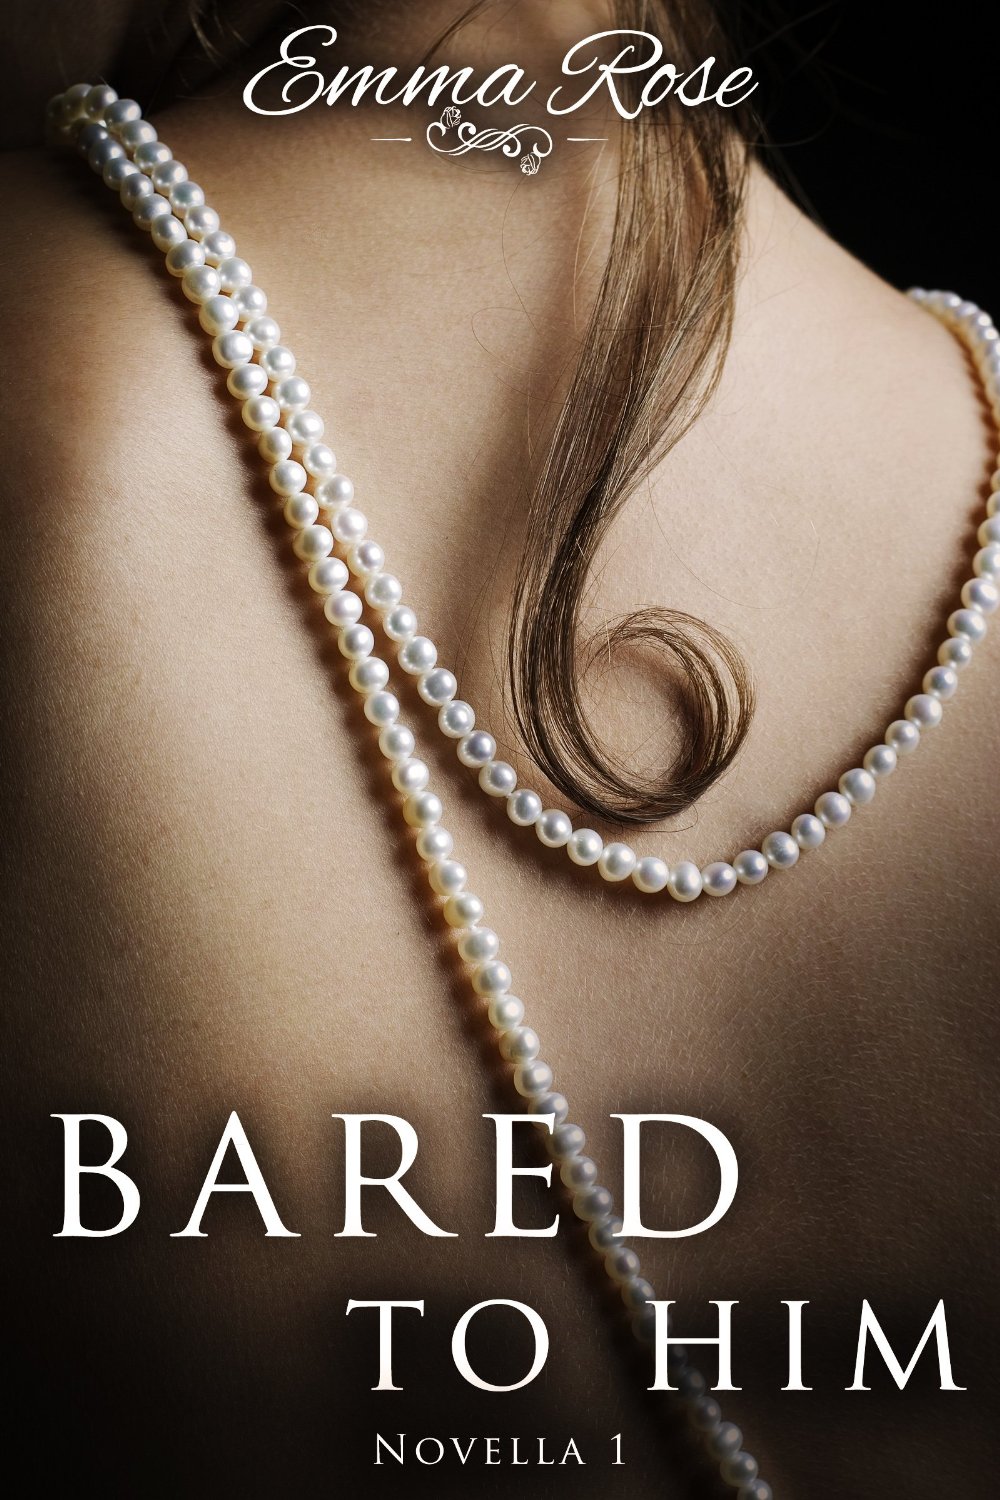 Bared to Him, Book #1 by Emma Roe